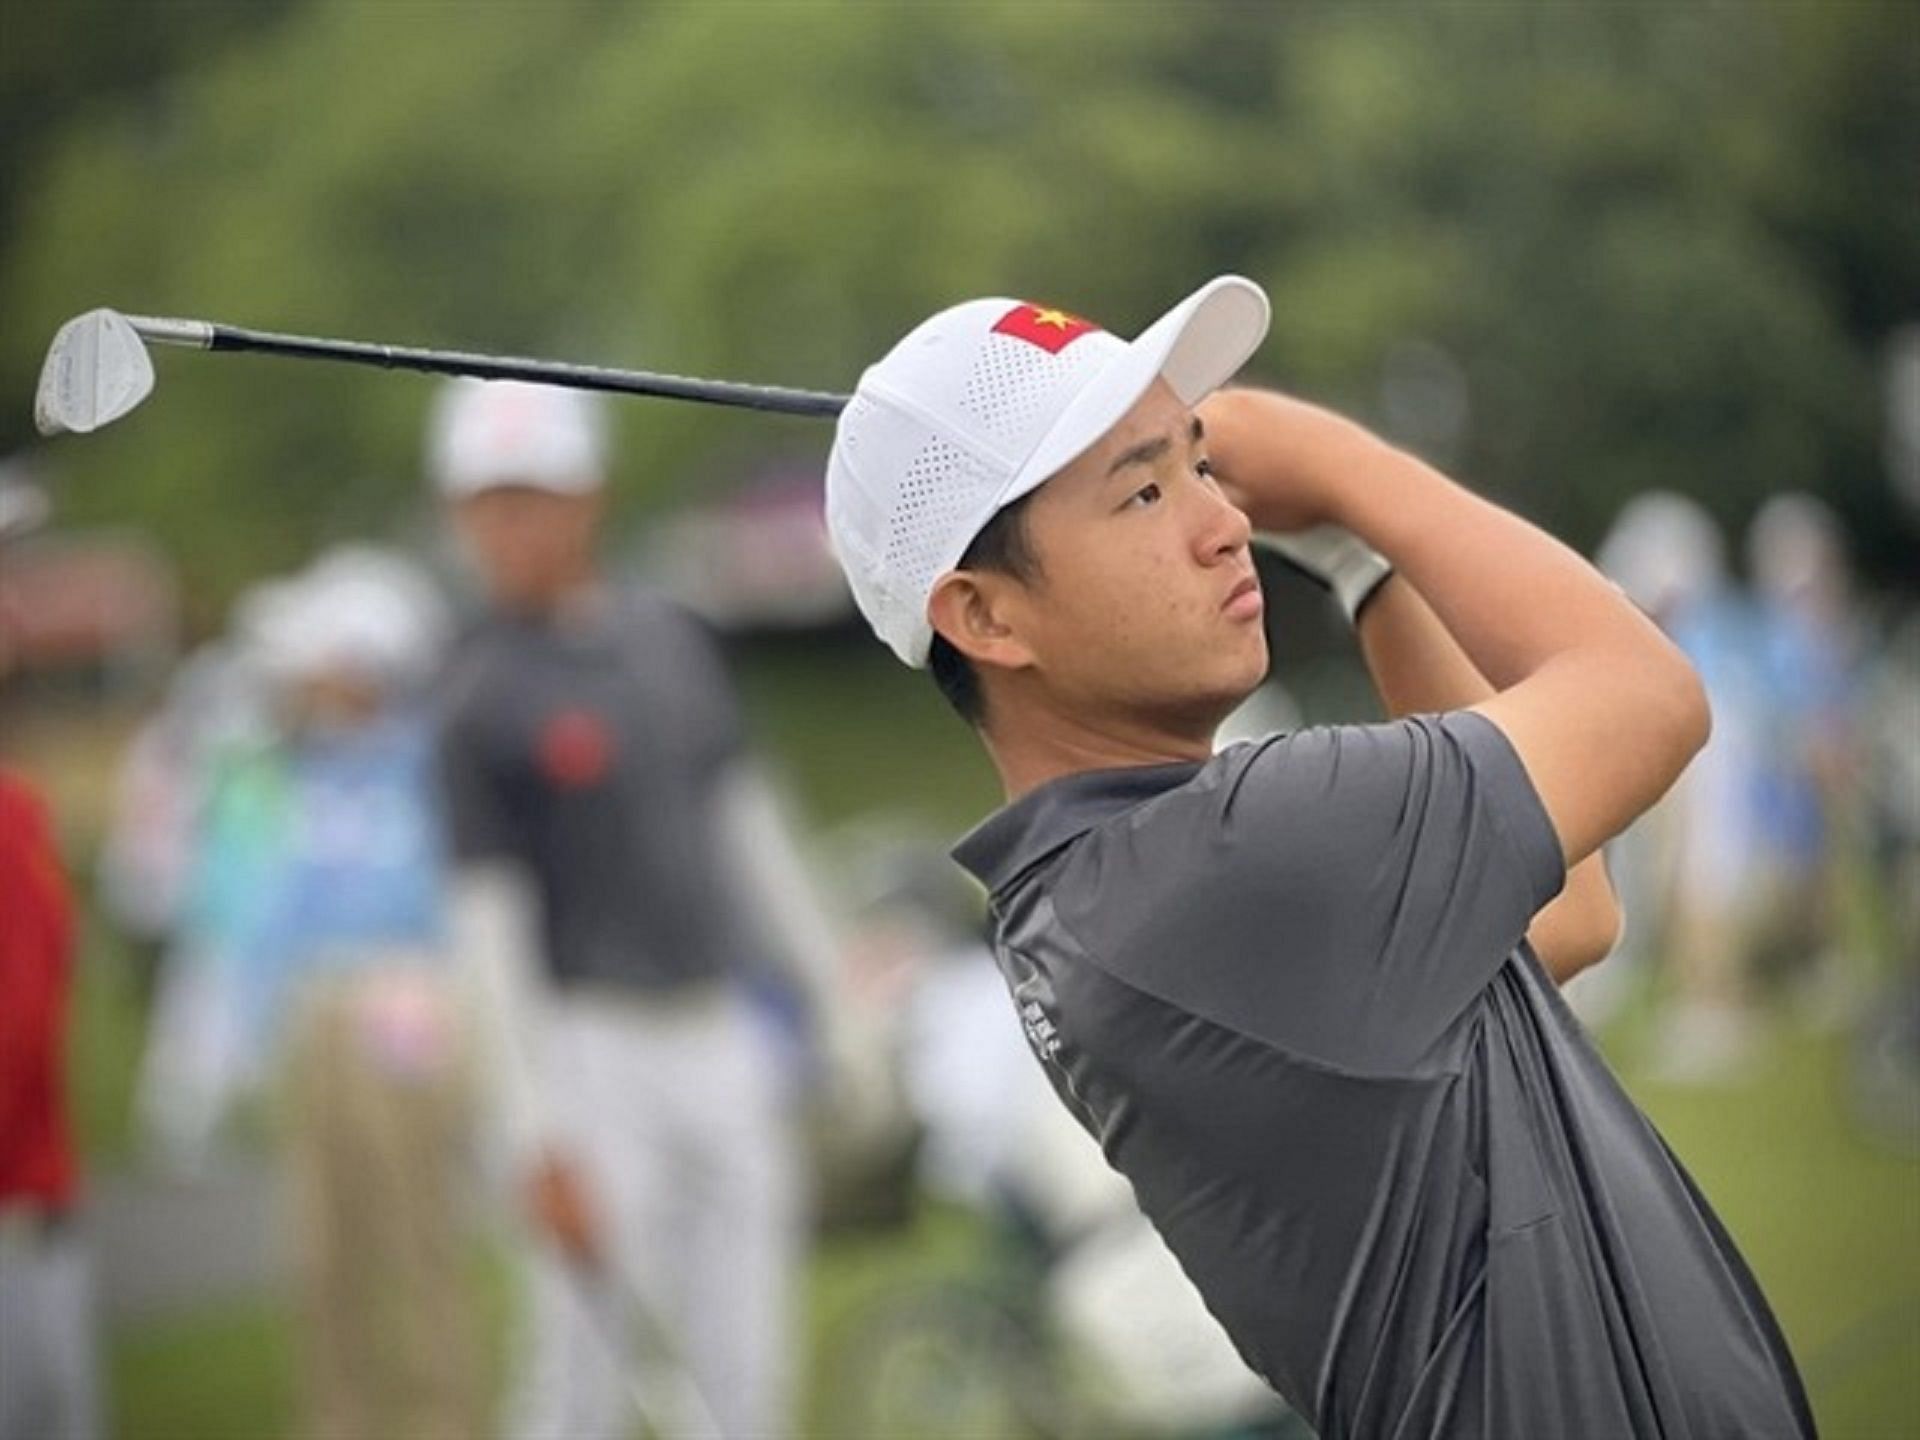 Nguyễn Anh Minh finished T7 at the 2023 Asia Pacific Amateur Championship (Image via golfnet.vn)